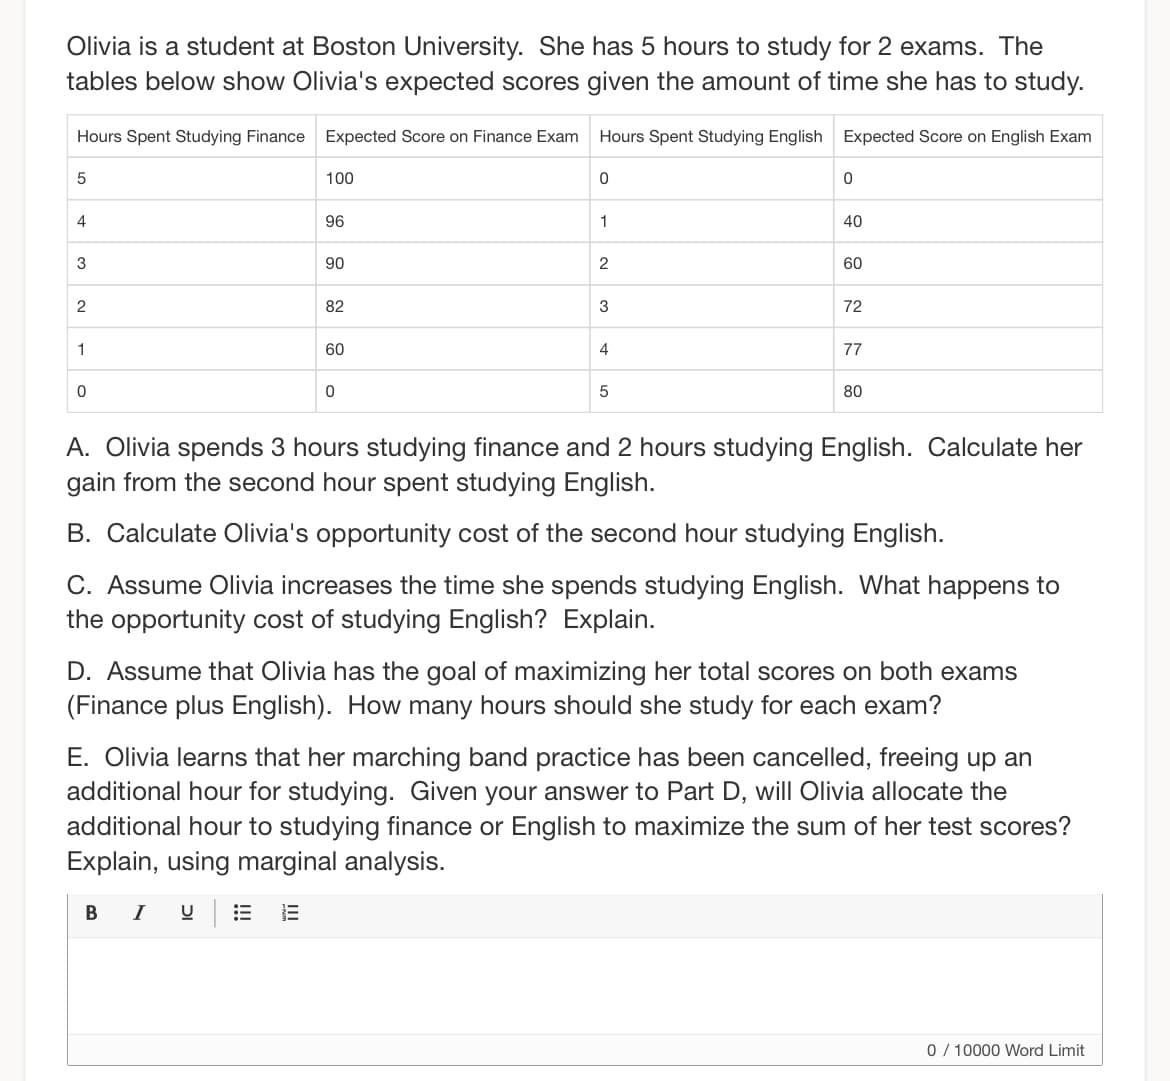 Olivia is a student at Boston University. She has 5 hours to study for 2 exams. The
tables below show Olivia's expected scores given the amount of time she has to study.
Hours Spent Studying Finance Expected Score on Finance Exam
5
4
3
2
1
0
100
96
90
B I
82
60
0
Hours Spent Studying English Expected Score on English Exam
0
1
2
3
4
5
0
40
60
72
77
80
A. Olivia spends 3 hours studying finance and 2 hours studying English. Calculate her
gain from the second hour spent studying English.
B. Calculate Olivia's opportunity cost of the second hour studying English.
C. Assume Olivia increases the time she spends studying English. What happens to
the opportunity cost of studying English? Explain.
D. Assume that Olivia has the goal of maximizing her total scores on both exams
(Finance plus English). How many hours should she study for each exam?
E. Olivia learns that her marching band practice has been cancelled, freeing up an
additional hour for studying. Given your answer to Part D, will Olivia allocate the
additional hour to studying finance or English to maximize the sum of her test scores?
Explain, using marginal analysis.
0/10000 Word Limit